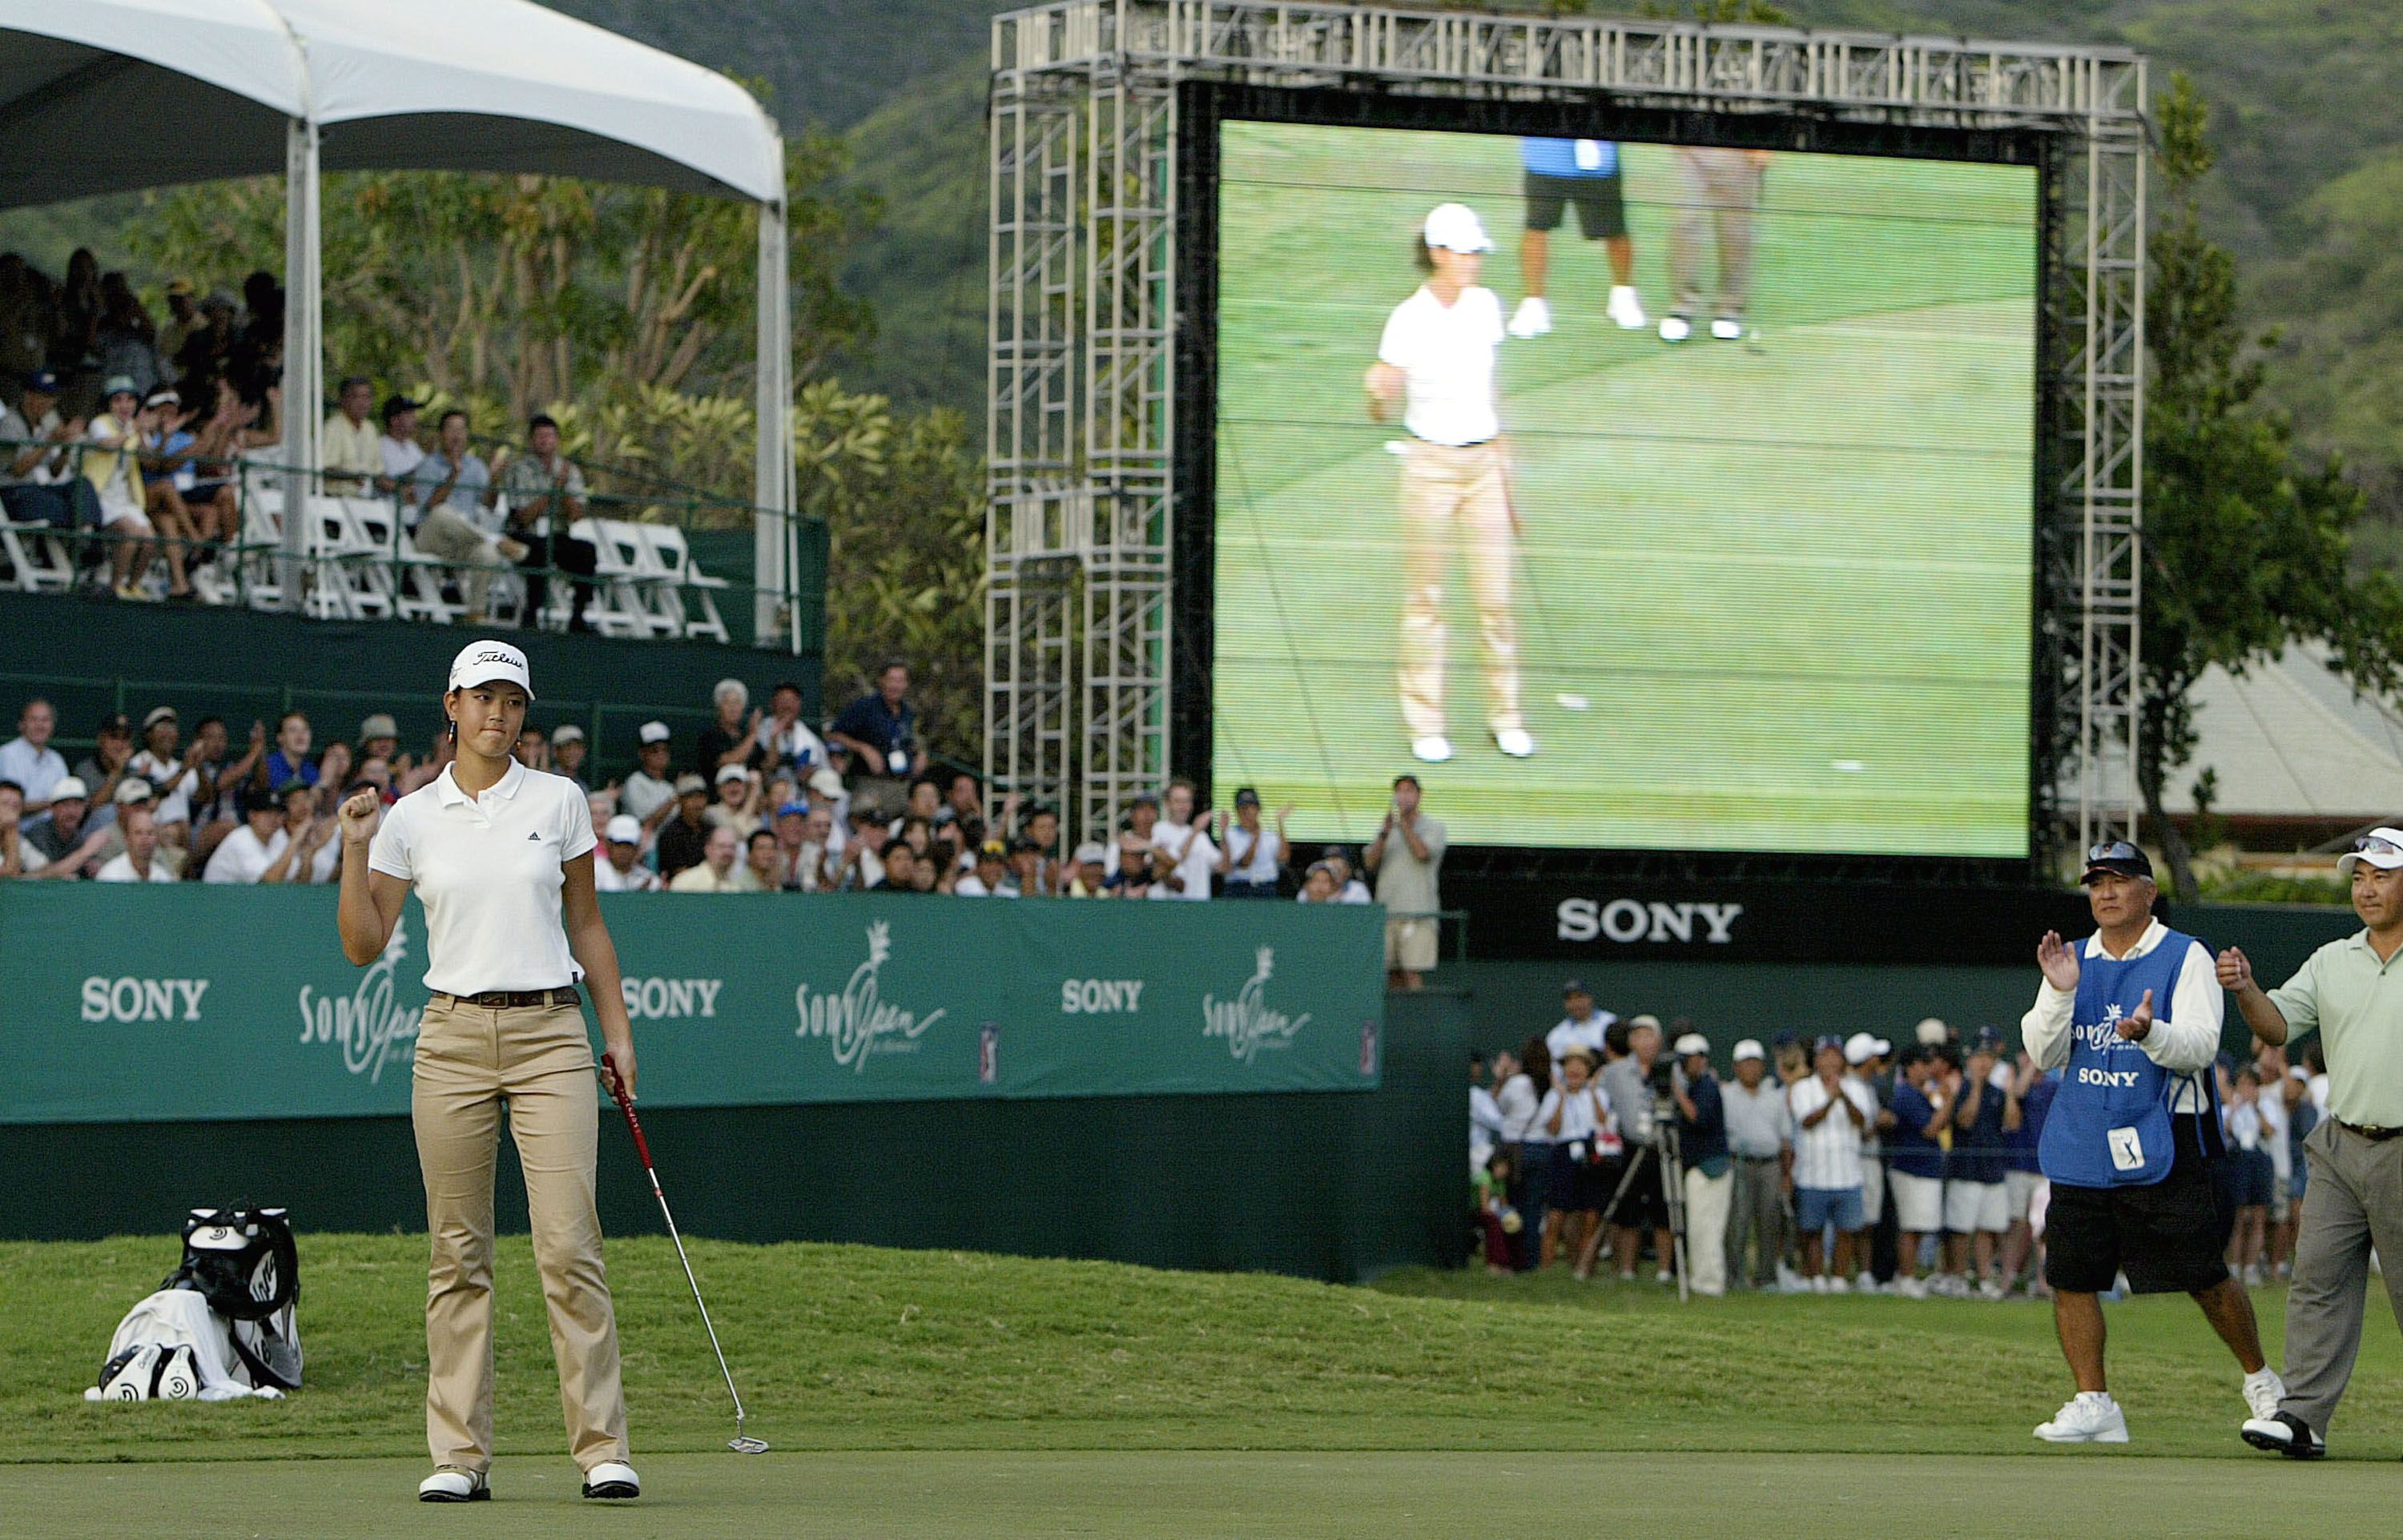 One of the most famed golf prodigies in recent history, a 10-year-old Michelle Wie became the youngest player to qualify for a USGA amateur Championship in 2000. Aged 14 in 2004, she bested many of the world's top men's players' and major winners at the Sony Open (pictured) despite narrowly missing the cut. With a professional career marred by injury, victory at the US Women's Open in 2014 has proven to be the career peak for Wie, who told CNN she had been <a href="index.php?page=&url=https%3A%2F%2Fwww.cnn.com%2F2020%2F12%2F10%2Fgolf%2Fmichelle-wie-west-womens-golf-lgpa-spt-intl%2Findex.html" target="_blank">considering retirement</a> before the birth of her daughter in 2020.